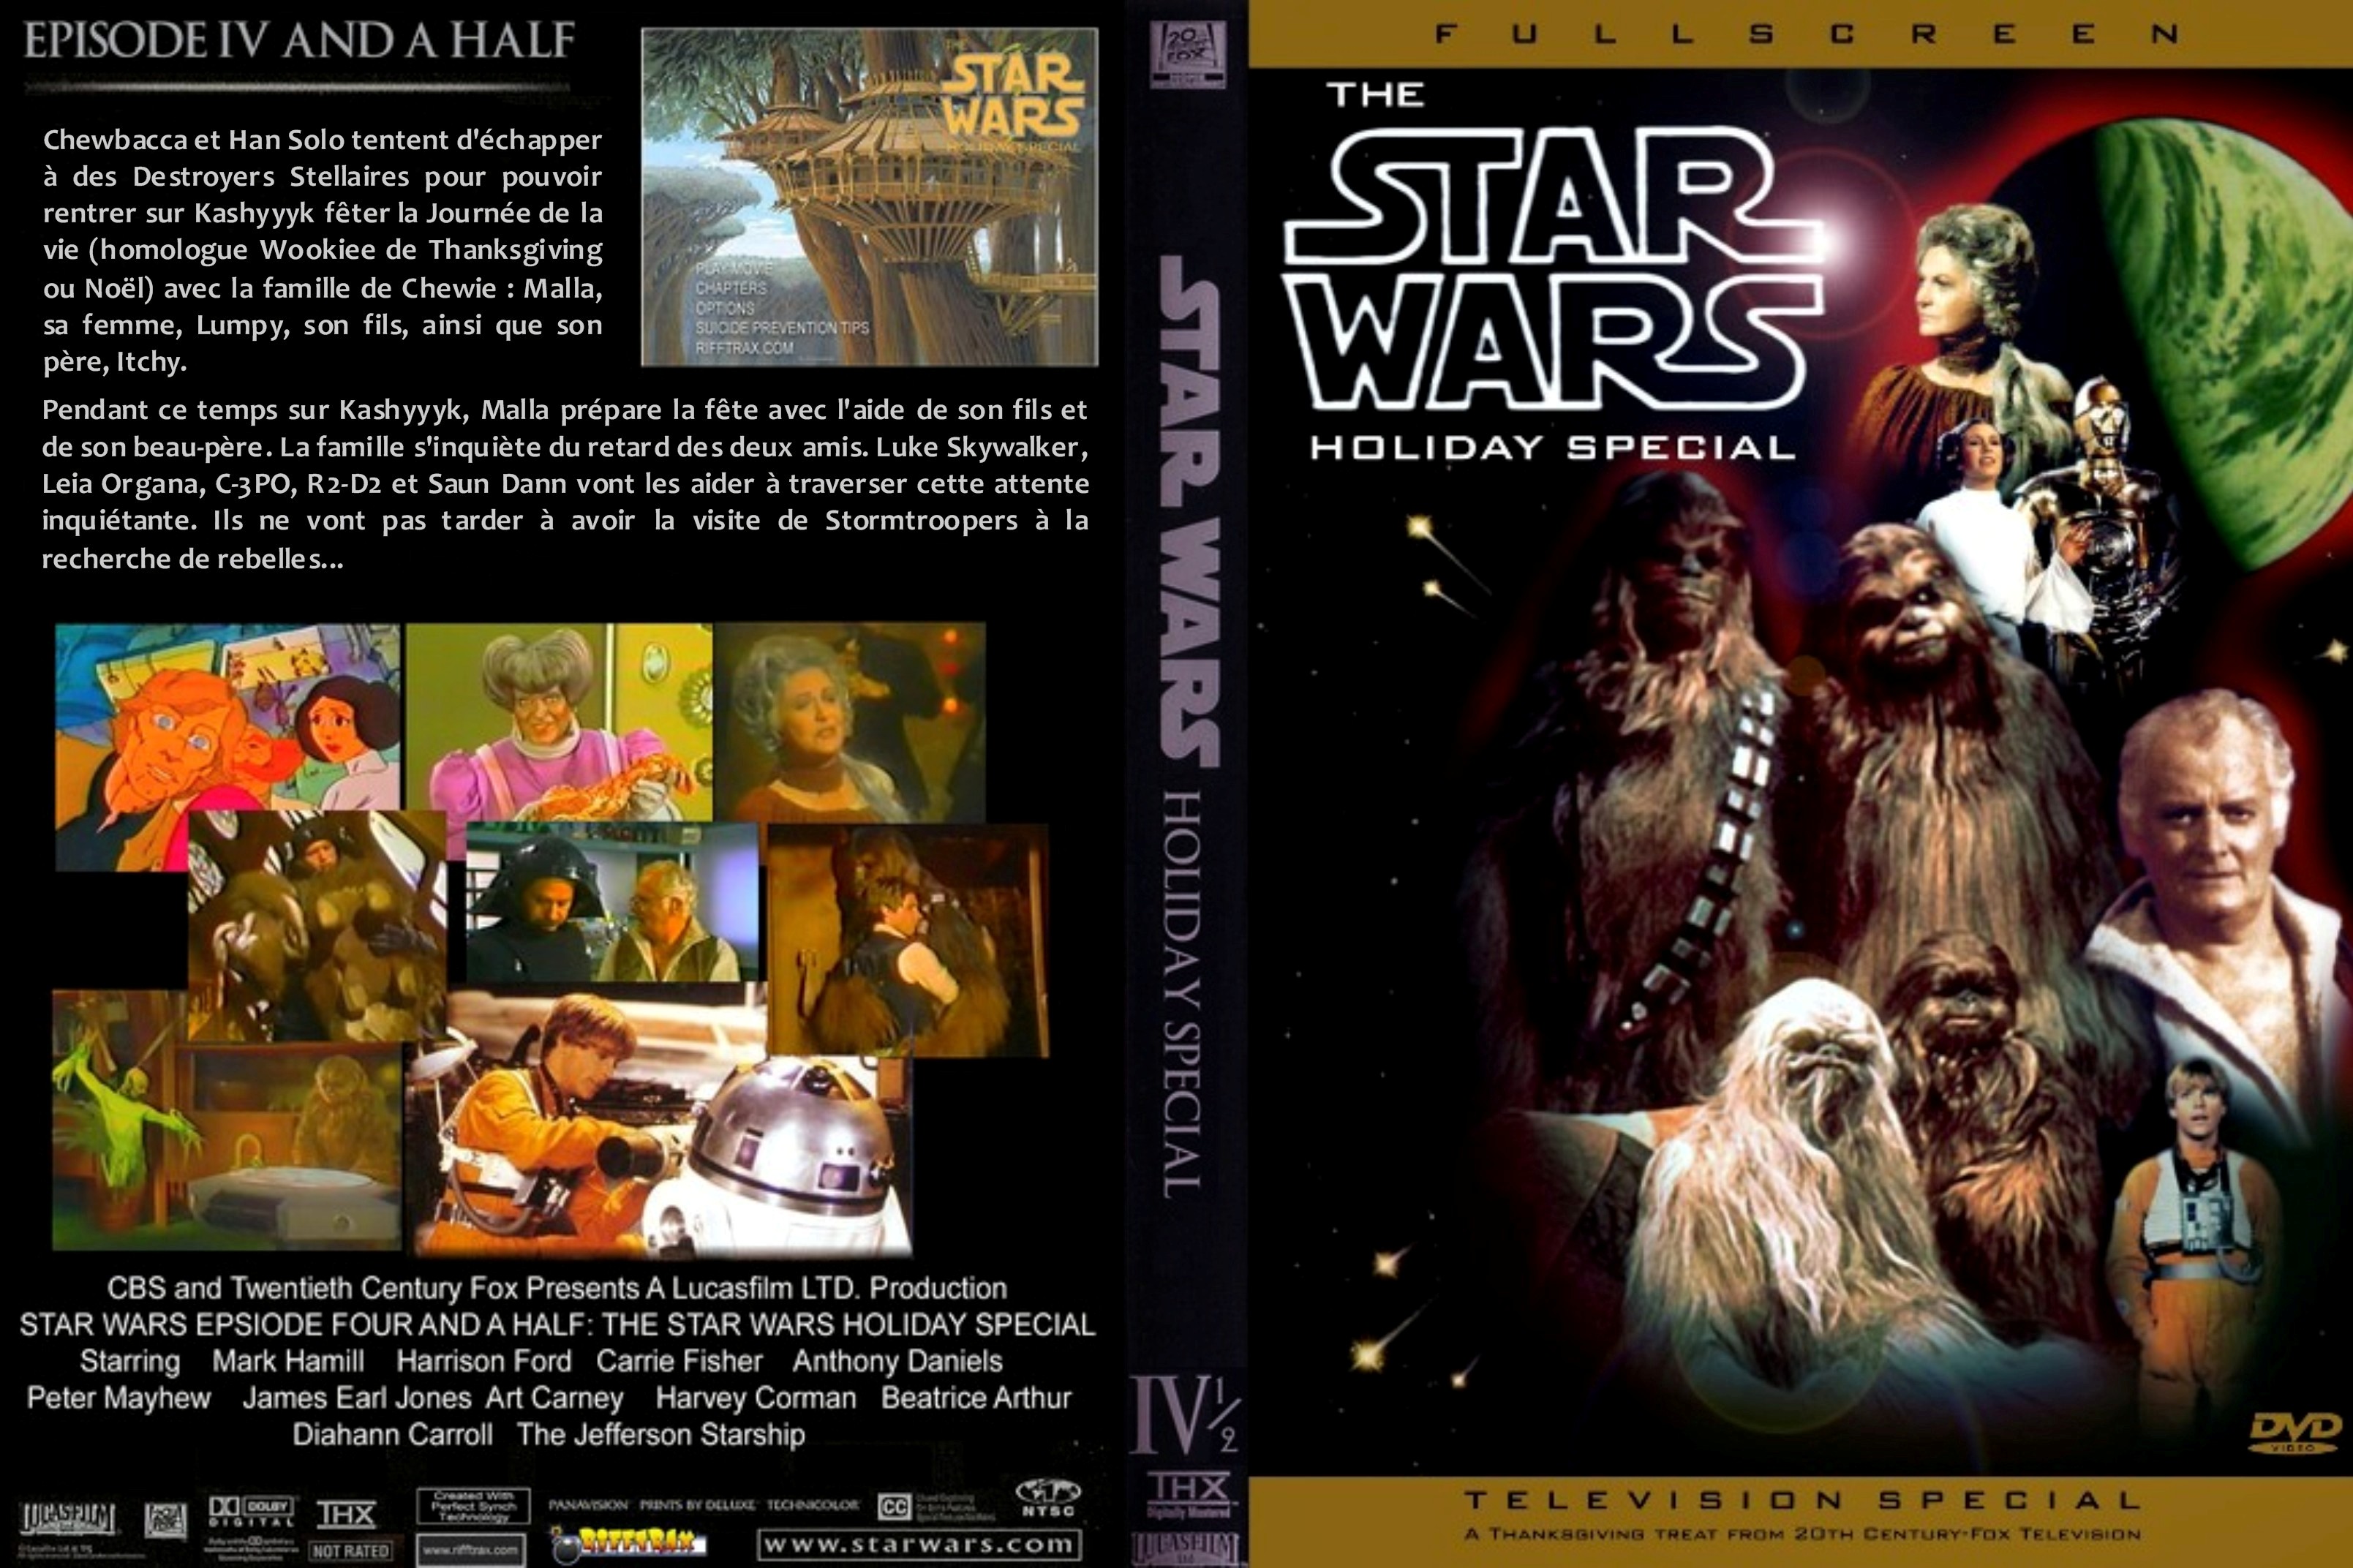 Jaquette DVD Star Wars - Holiday Special custom